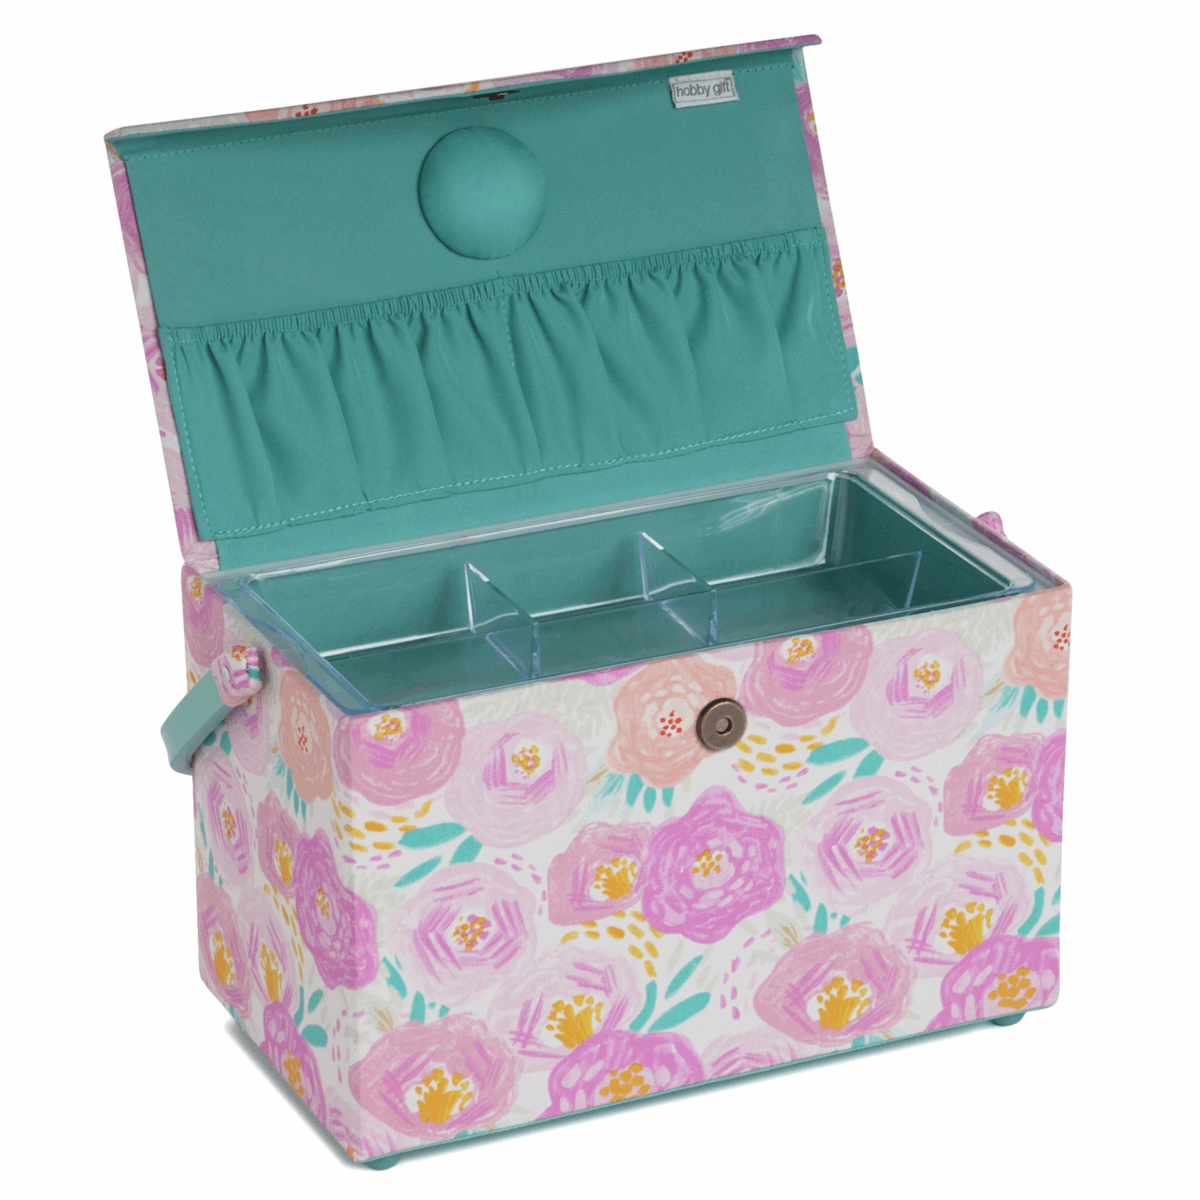 Floral Dream Sewing Box with Lid - Medium